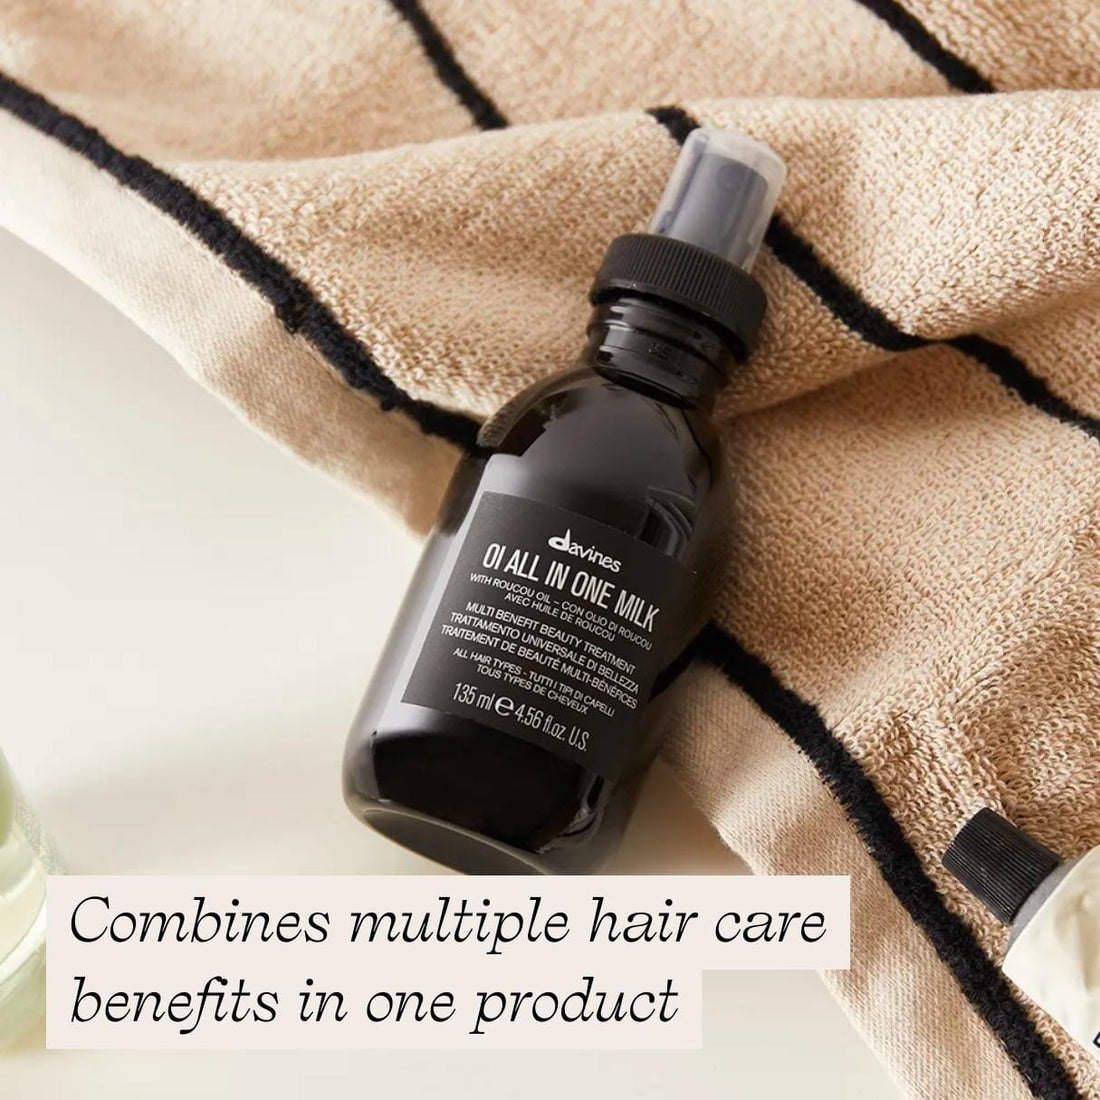 Davines OI All in One Milk: Multi-Benefit Beauty Treatment - HairMNL - Combines multiple hair care benefits in one product